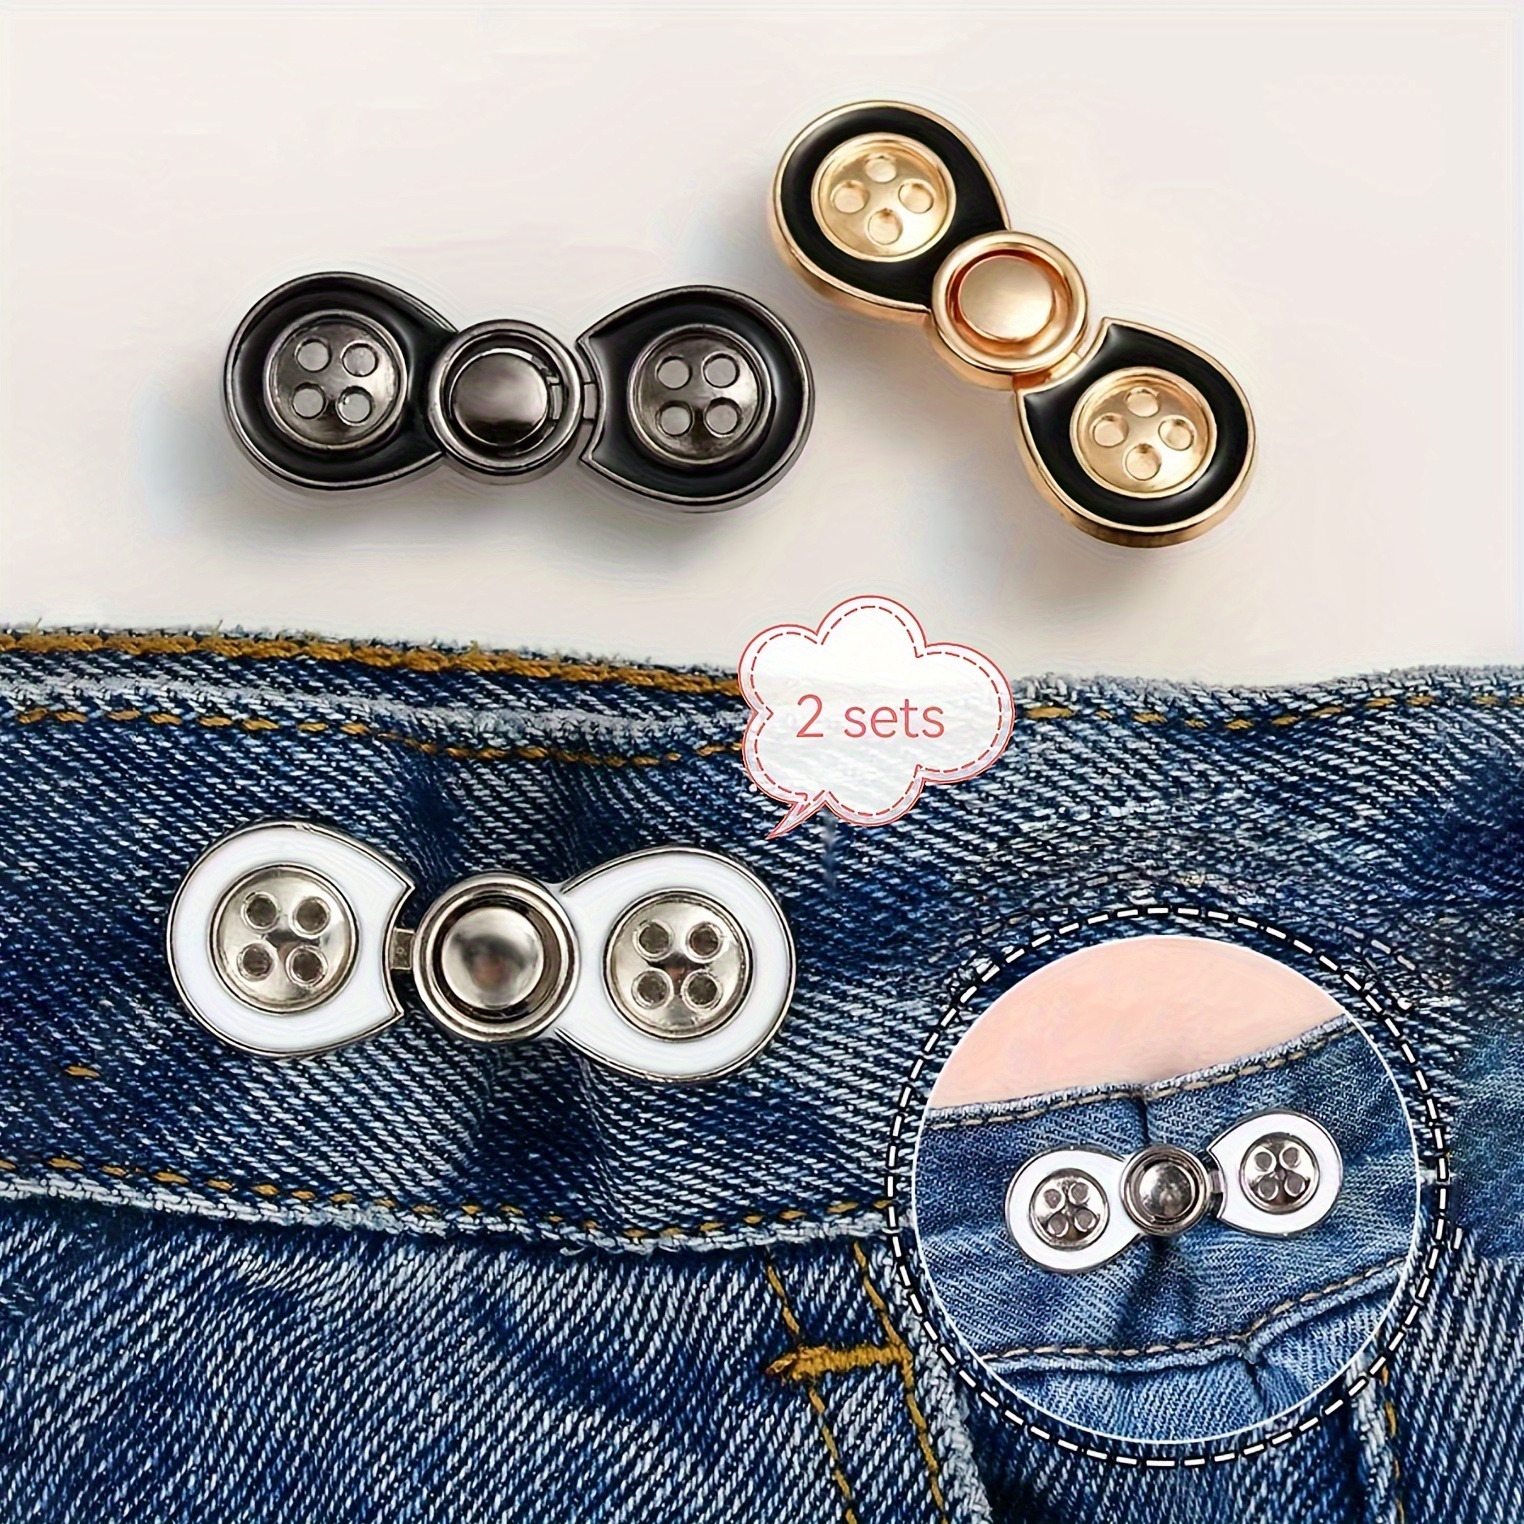 2pcs Women's Brooch Set Tighten Waist Brooches Nail Free Alloy Pants Jeans  Adjustable Waist Clip Pins Clothing Accessory No Sewing Waistband Tightener  Bag Pins